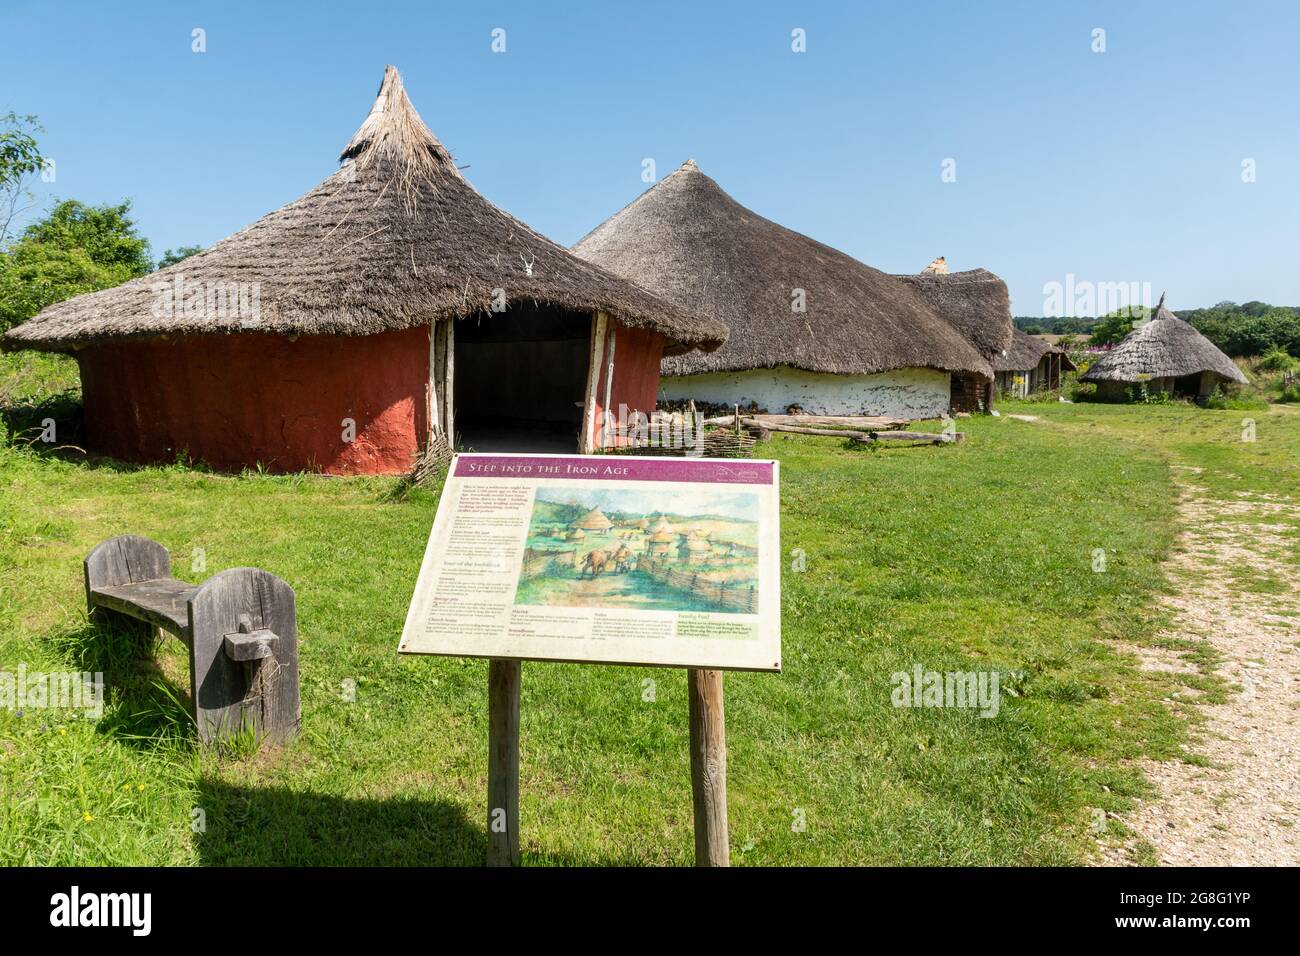 Iron age roundhouses reconstructed at Butser Ancient Farm archeological open-air museum in Hampshire, England, UK Stock Photo